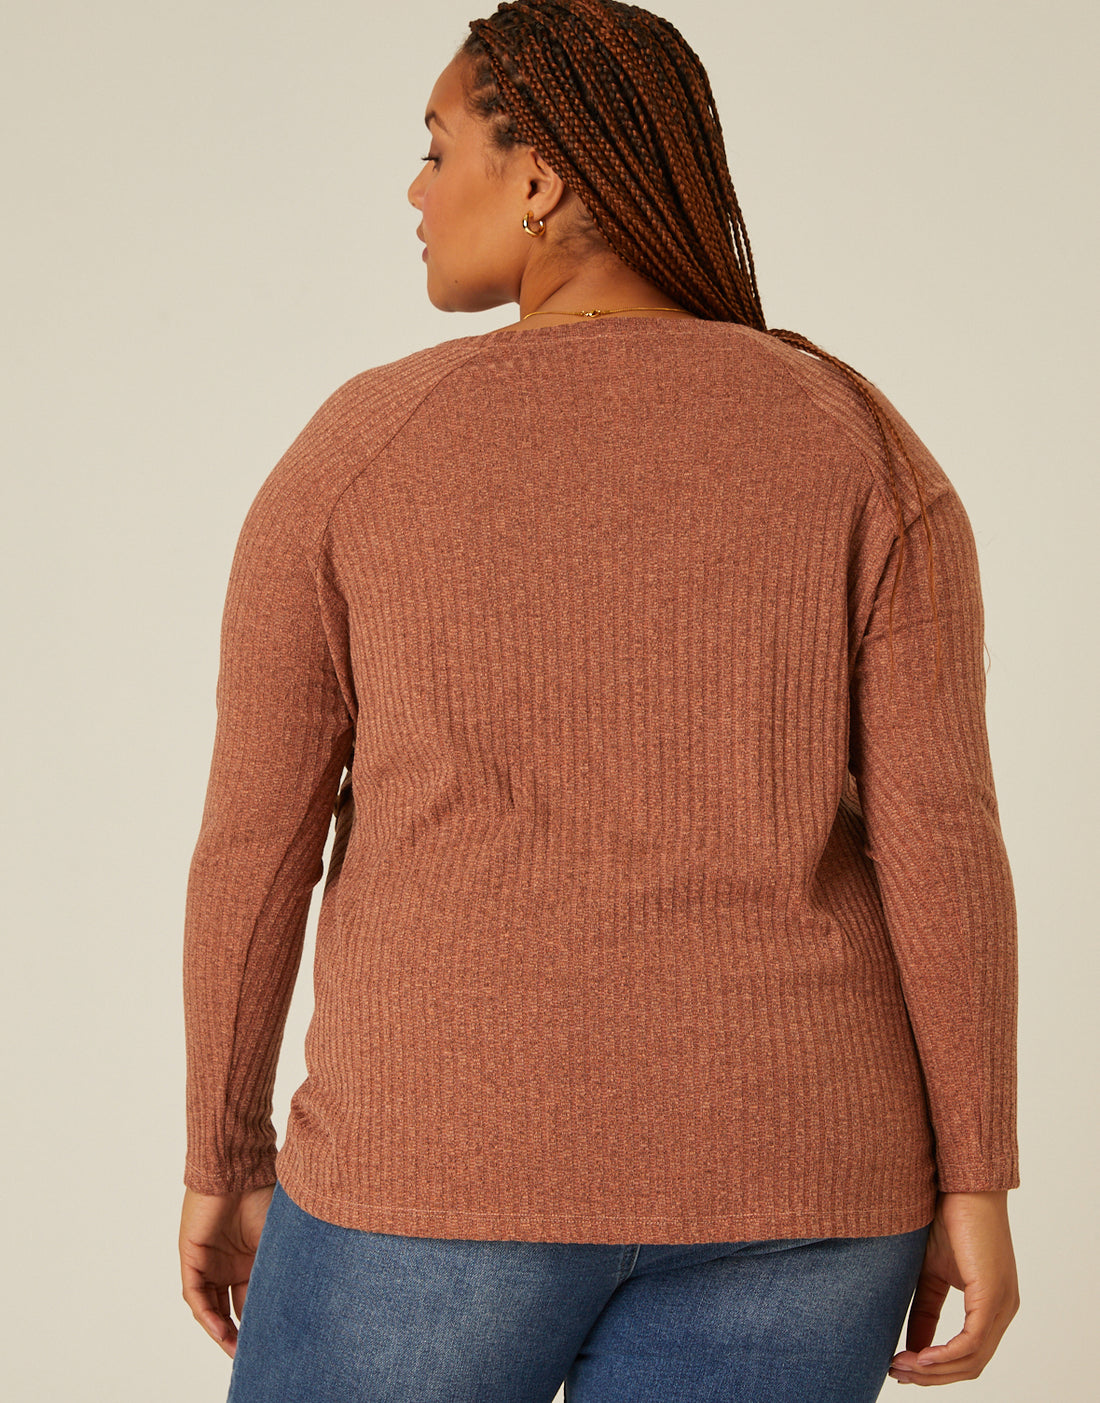 Curve Button Detail Ribbed Top Plus Size Tops -2020AVE